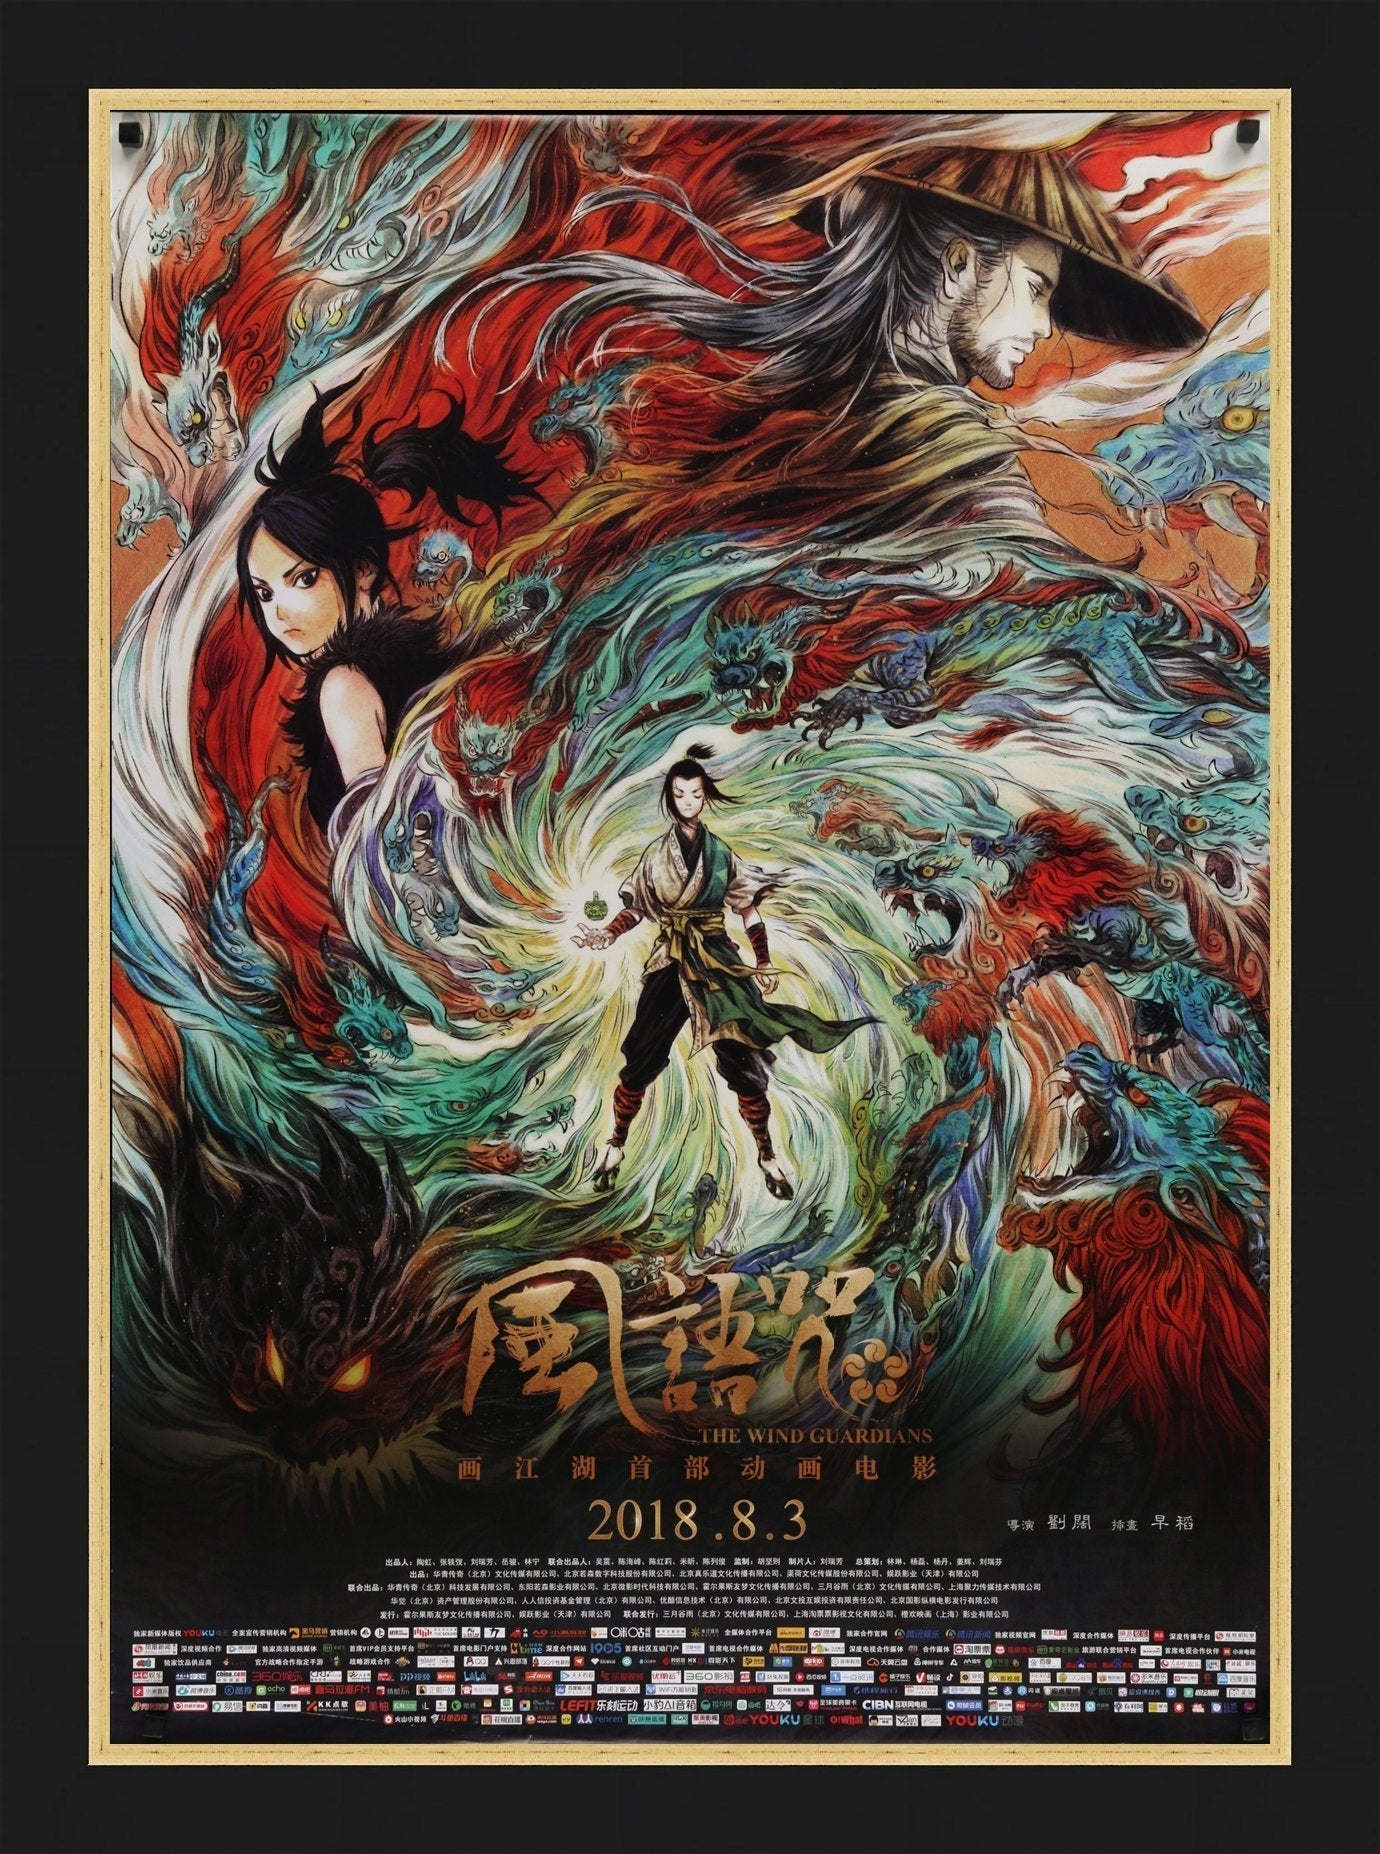 An original movie poster for the Chinese film The Wind Guardians